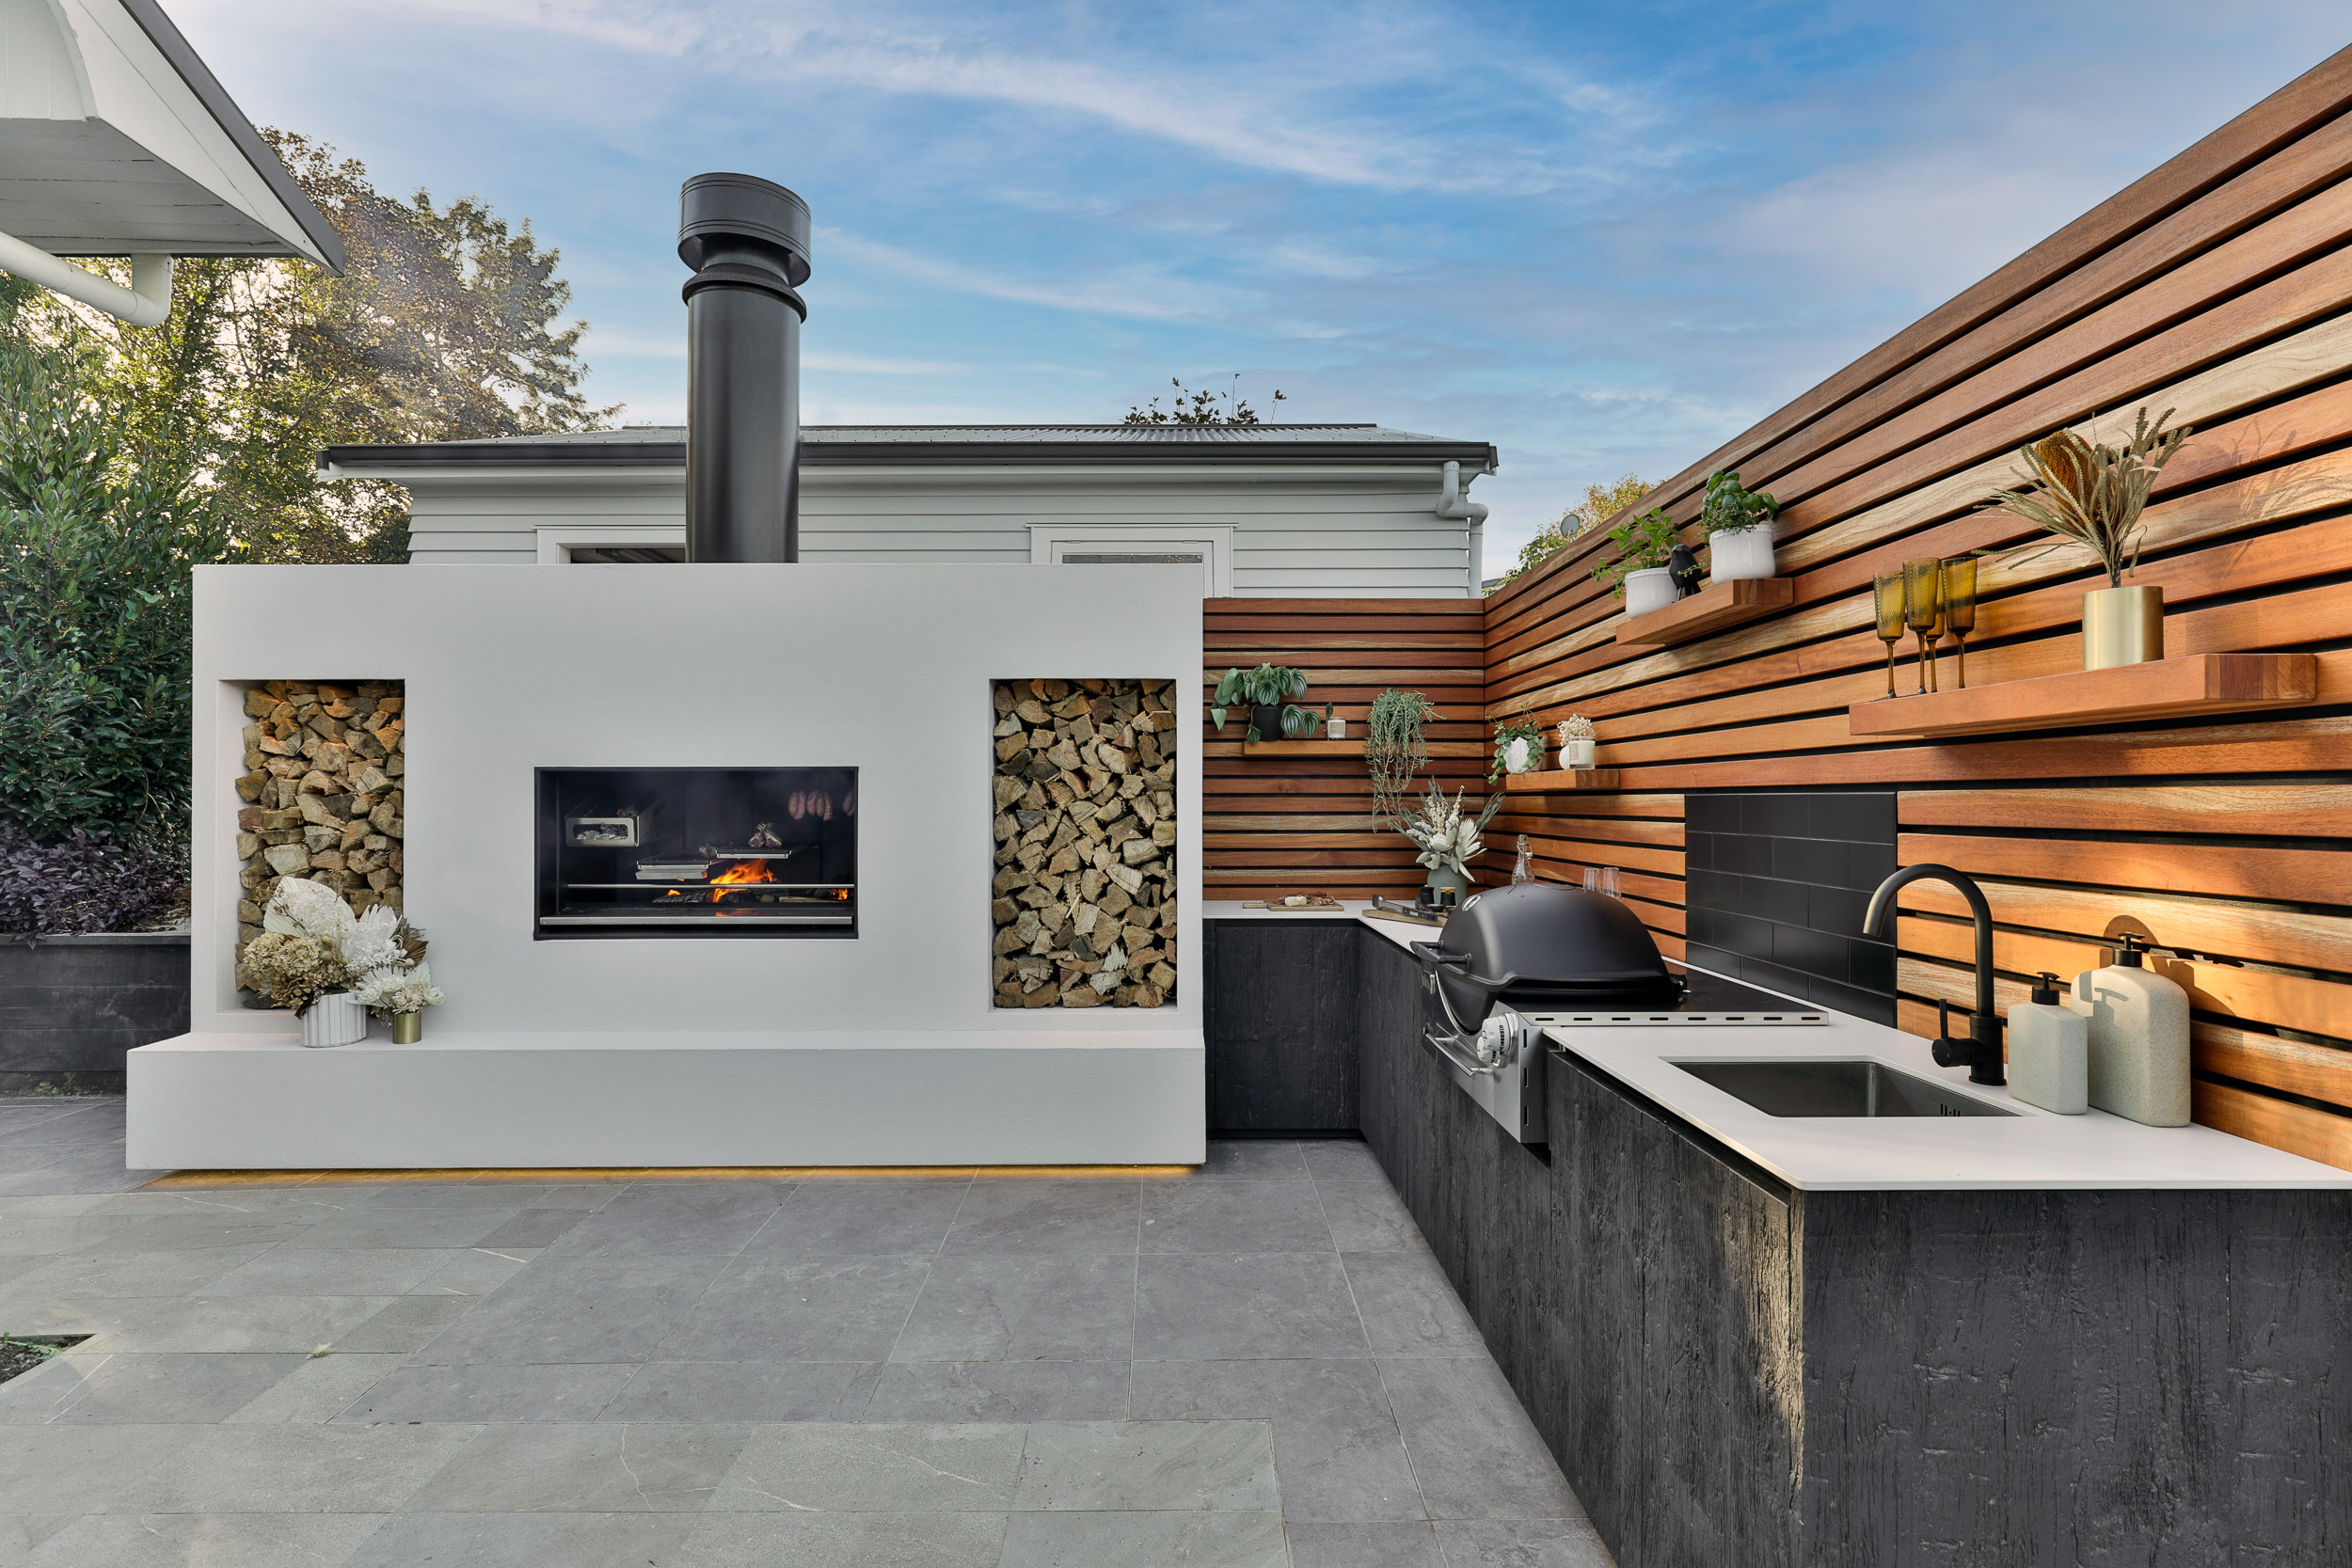 How to create an outdoor fireplace kitchen